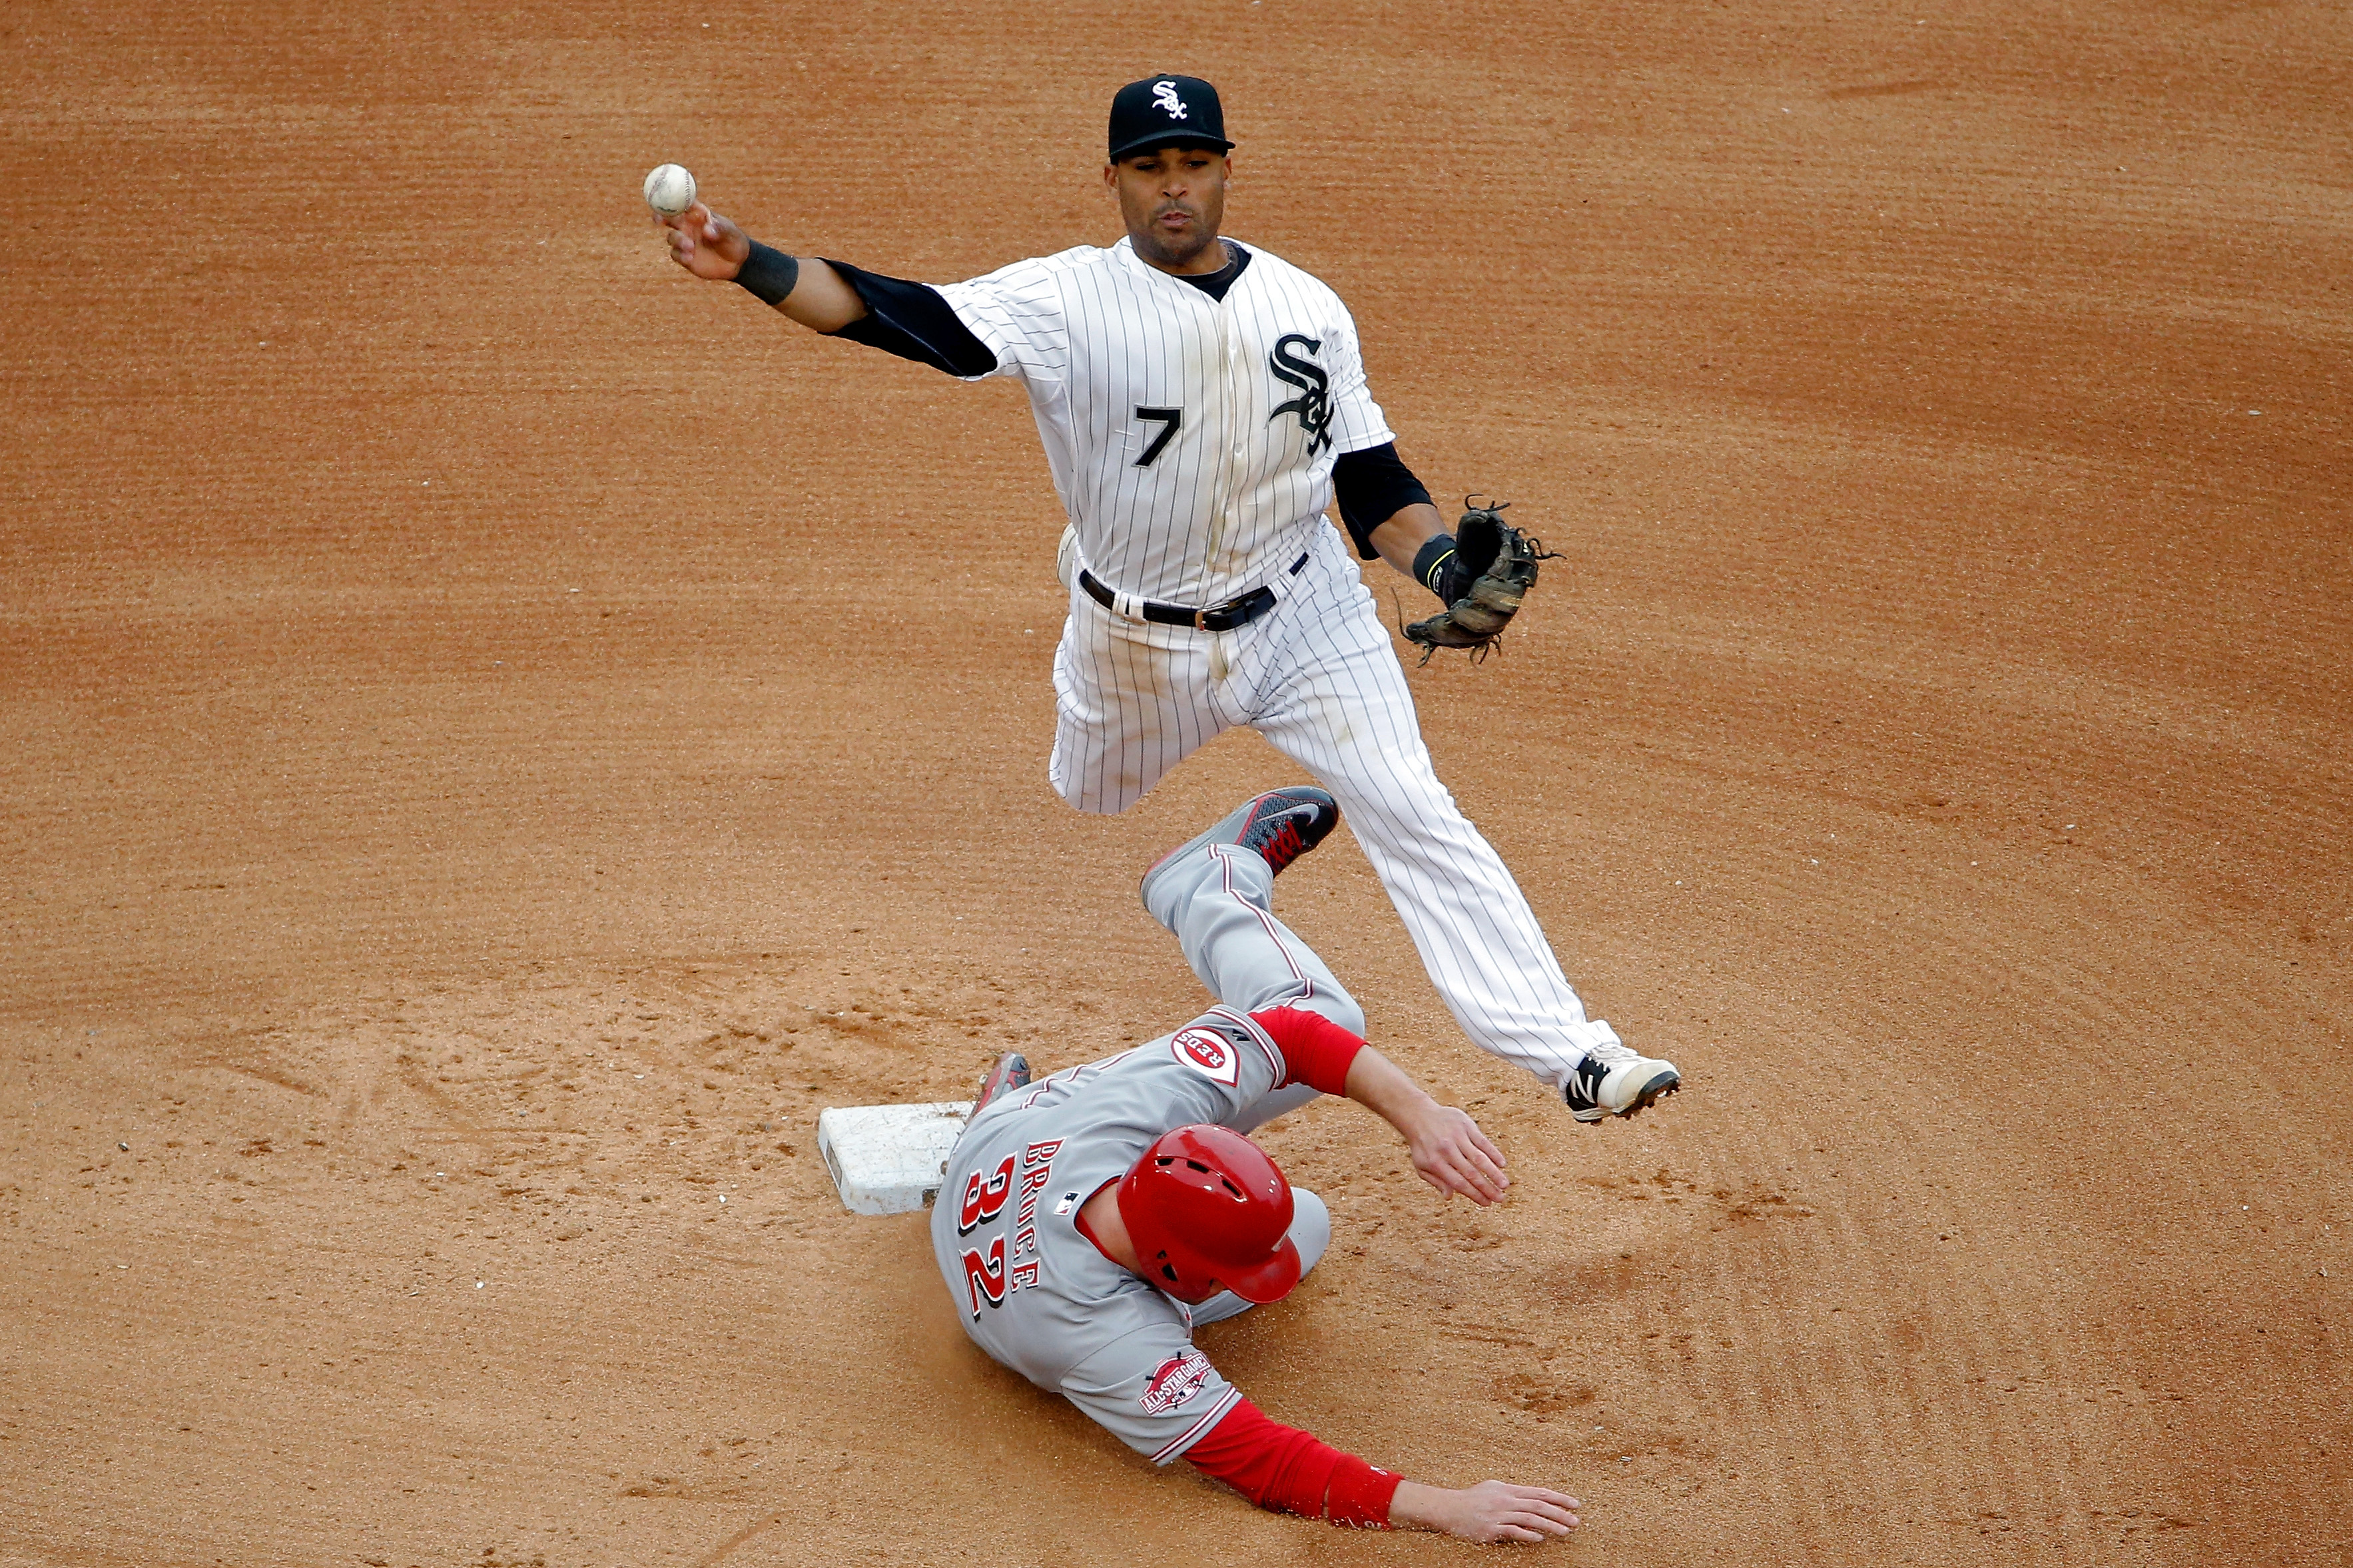 Micah Johnson #7 of the Chicago White Sox leaps in the air to throw to first base as Jay Bruce #32 of the Cincinnati Reds slides into second base during the sixth inning in the first game of a doubleheader on May 9, 2015 at U.S. Cellular Field in Chicago, Illinois. (Photo by Jon Durr/Getty Images) (Getty Images)